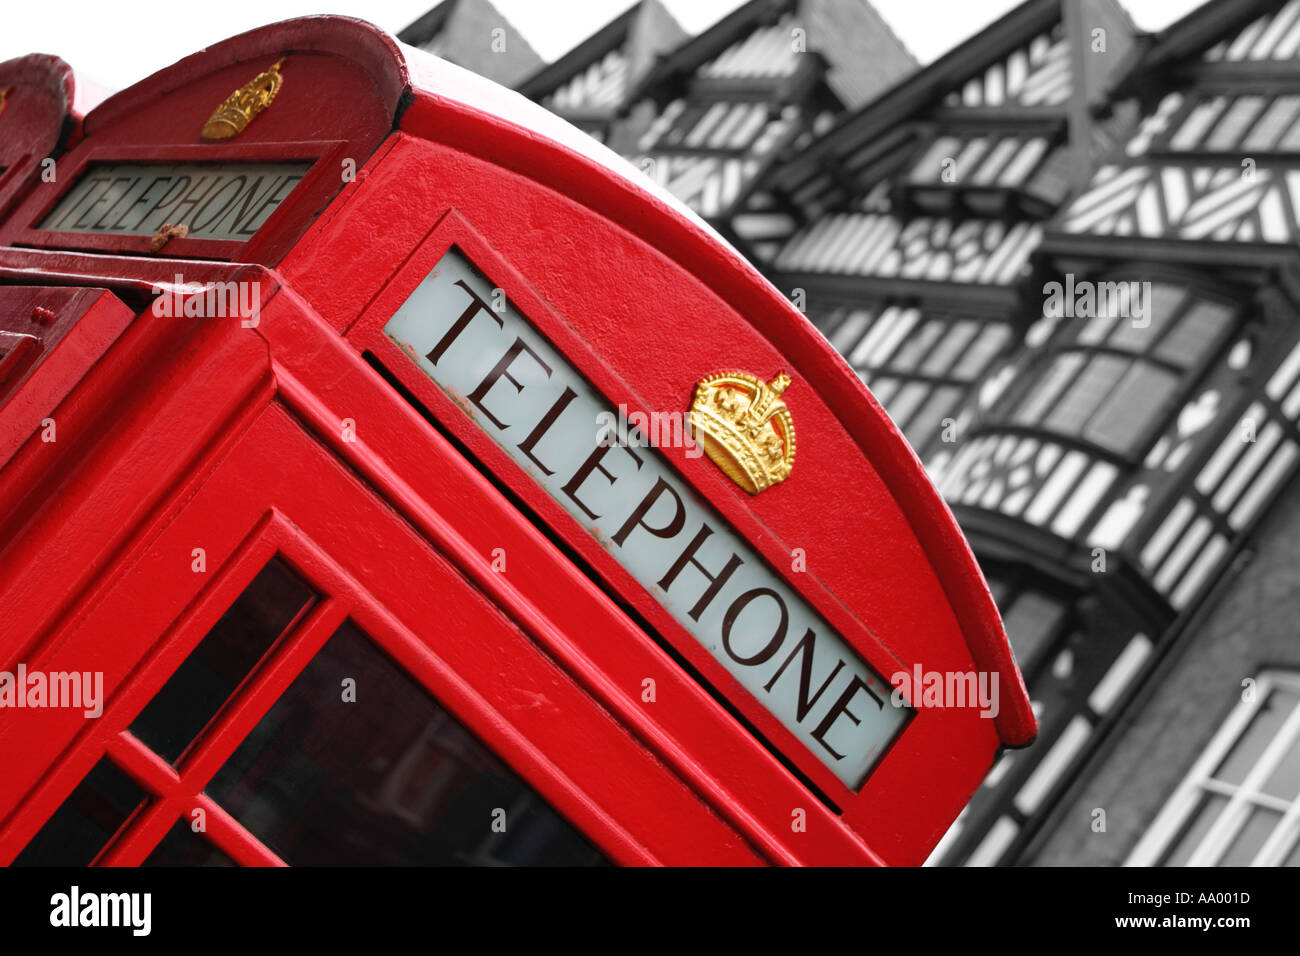 RED TELEPHONE BOX CITY OF CHESTER Stock Photo